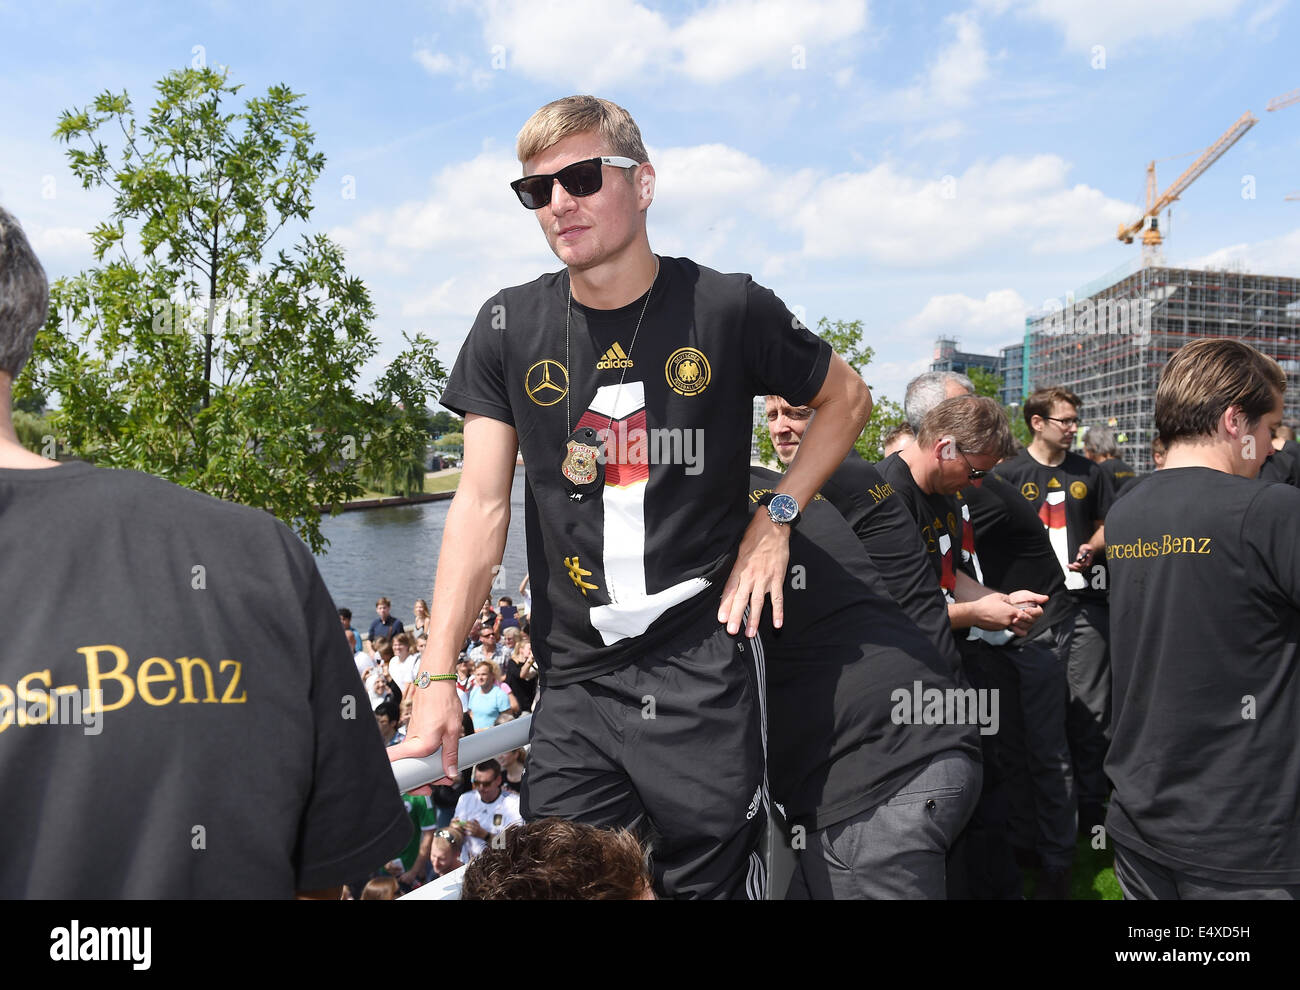 Berlin, Germany. 15th July, 2014. HANDOUT - Germany's Toni Kroos celebrates during the World Cup party at the Brandenburg Gate after team Germany arrived back in Germany in Berlin, Germany, 15 July 2014. The German team won the Brazil 2014 FIFA Soccer World Cup final against Argentina by 1-0 on 13 July 2014, winning the world cup title for the fourth time after 1954, 1974 and 1990. Photo: Markus Gilliar/GES/DFB/dpa (ATTENTION: Editorial use only and mandatory credit 'Photo: Markus Gilliar/GES/DFB/dpa')/dpa/Alamy Live News Stock Photo